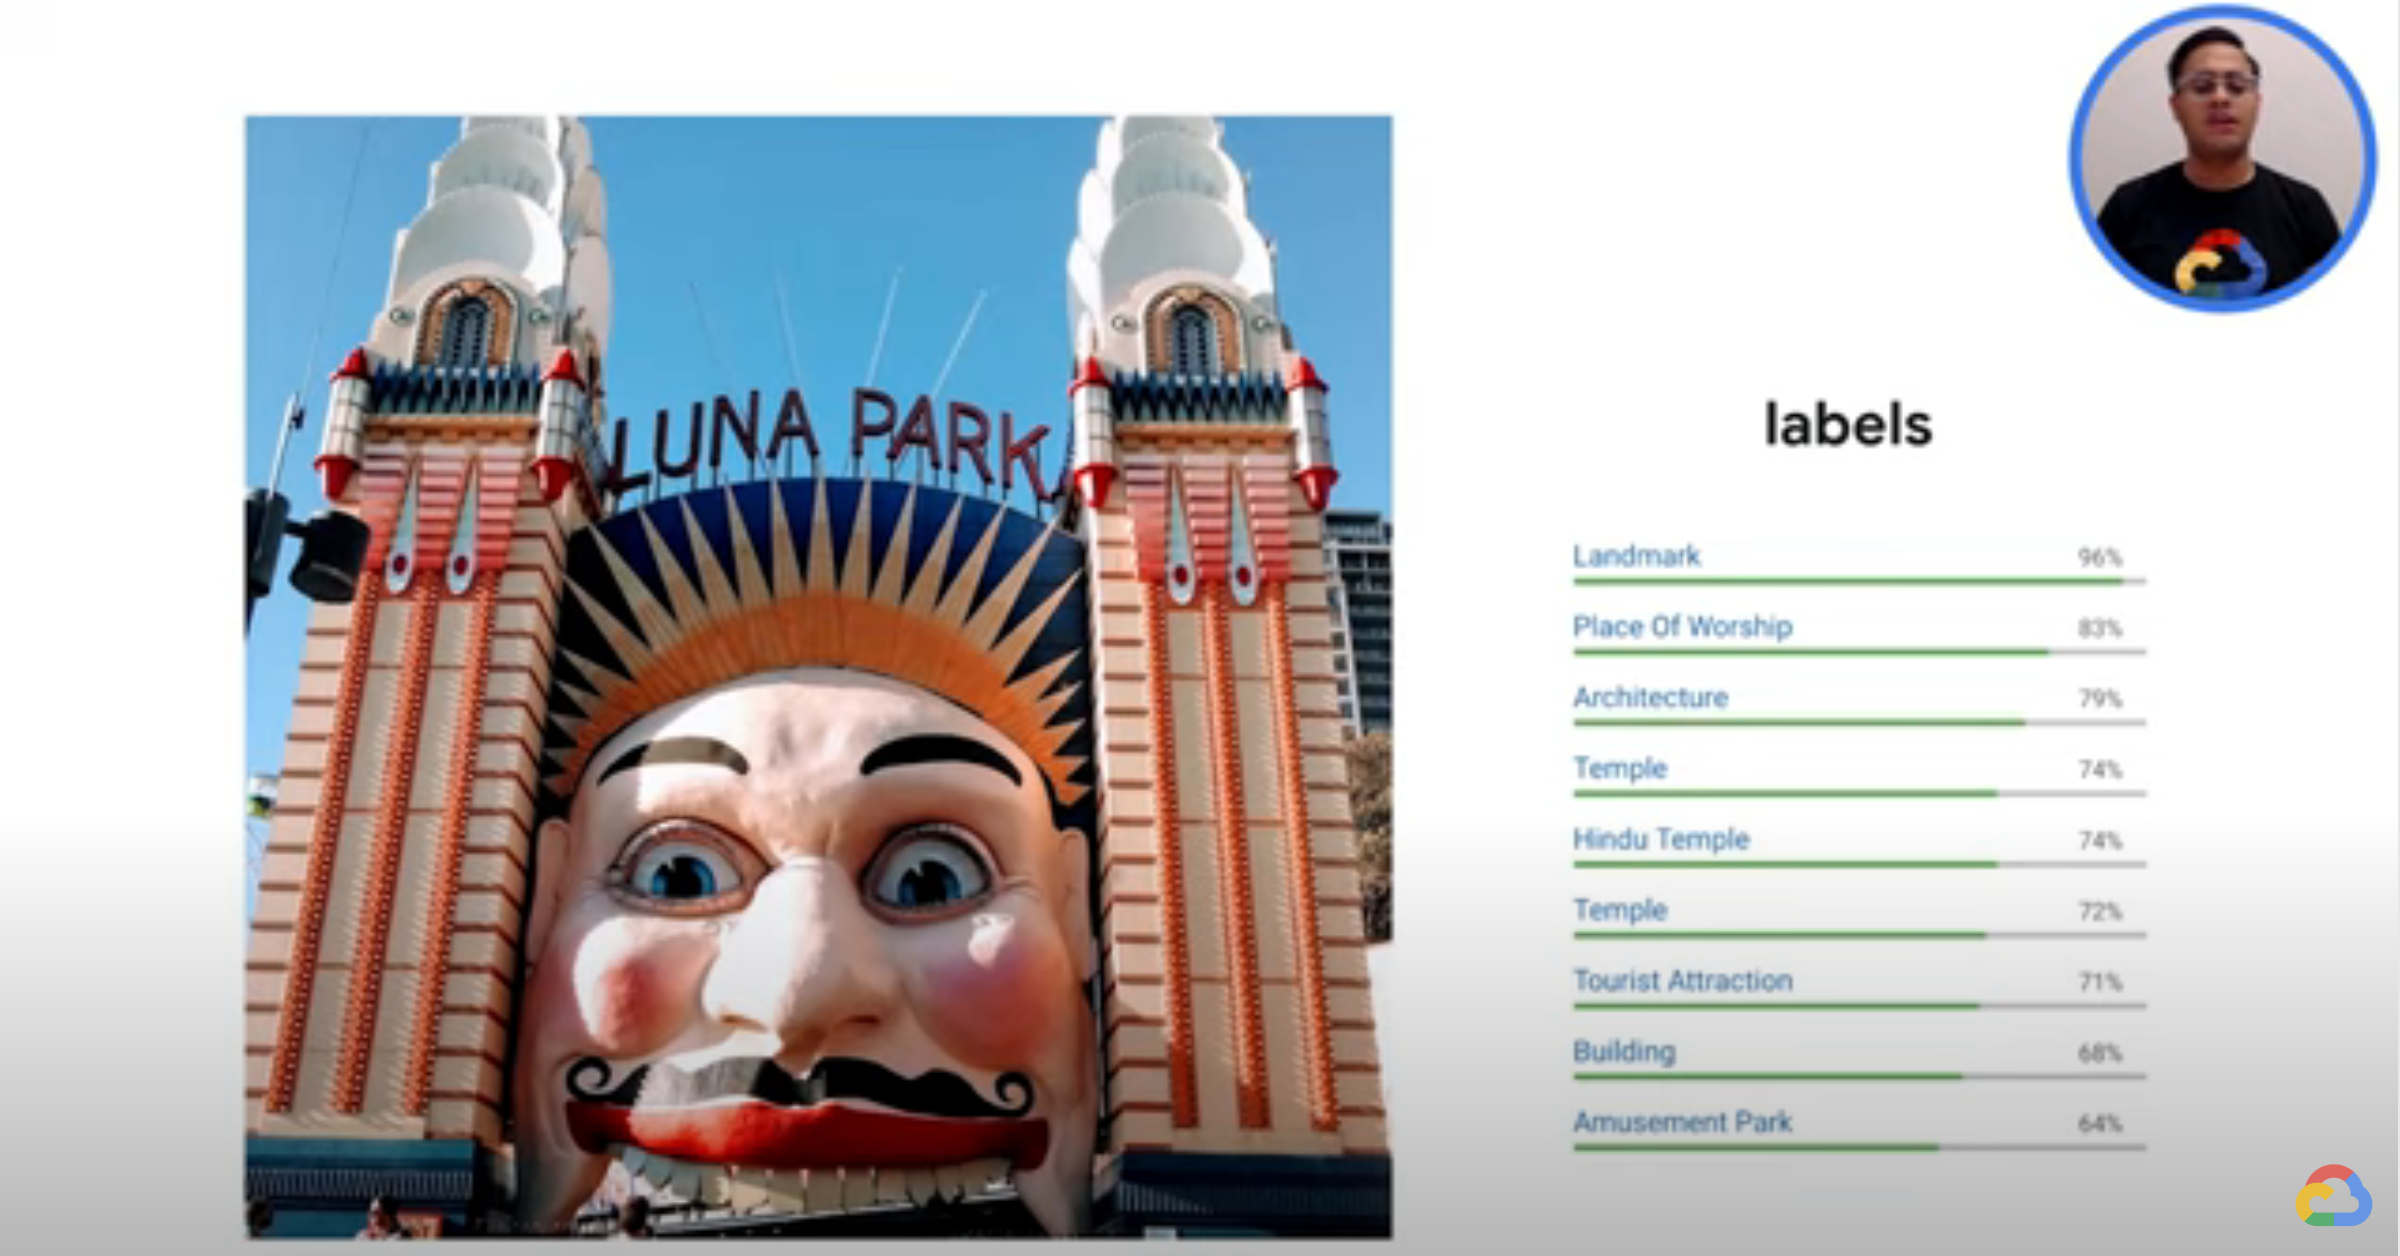 AutoML example of AI training with labels for a park image.